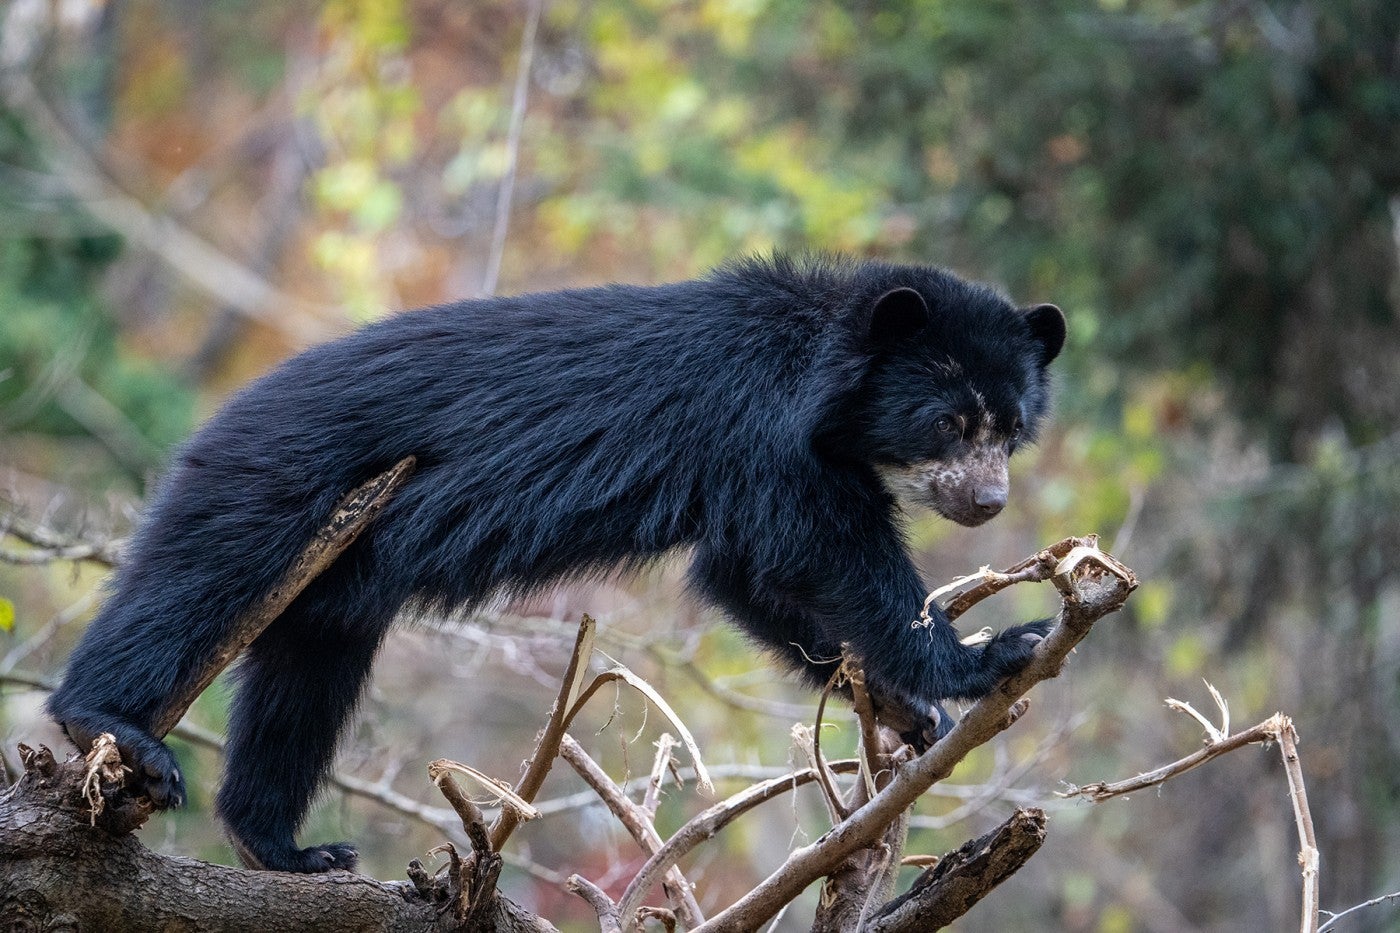 Andean bear Sean balances on branches in the treetop.